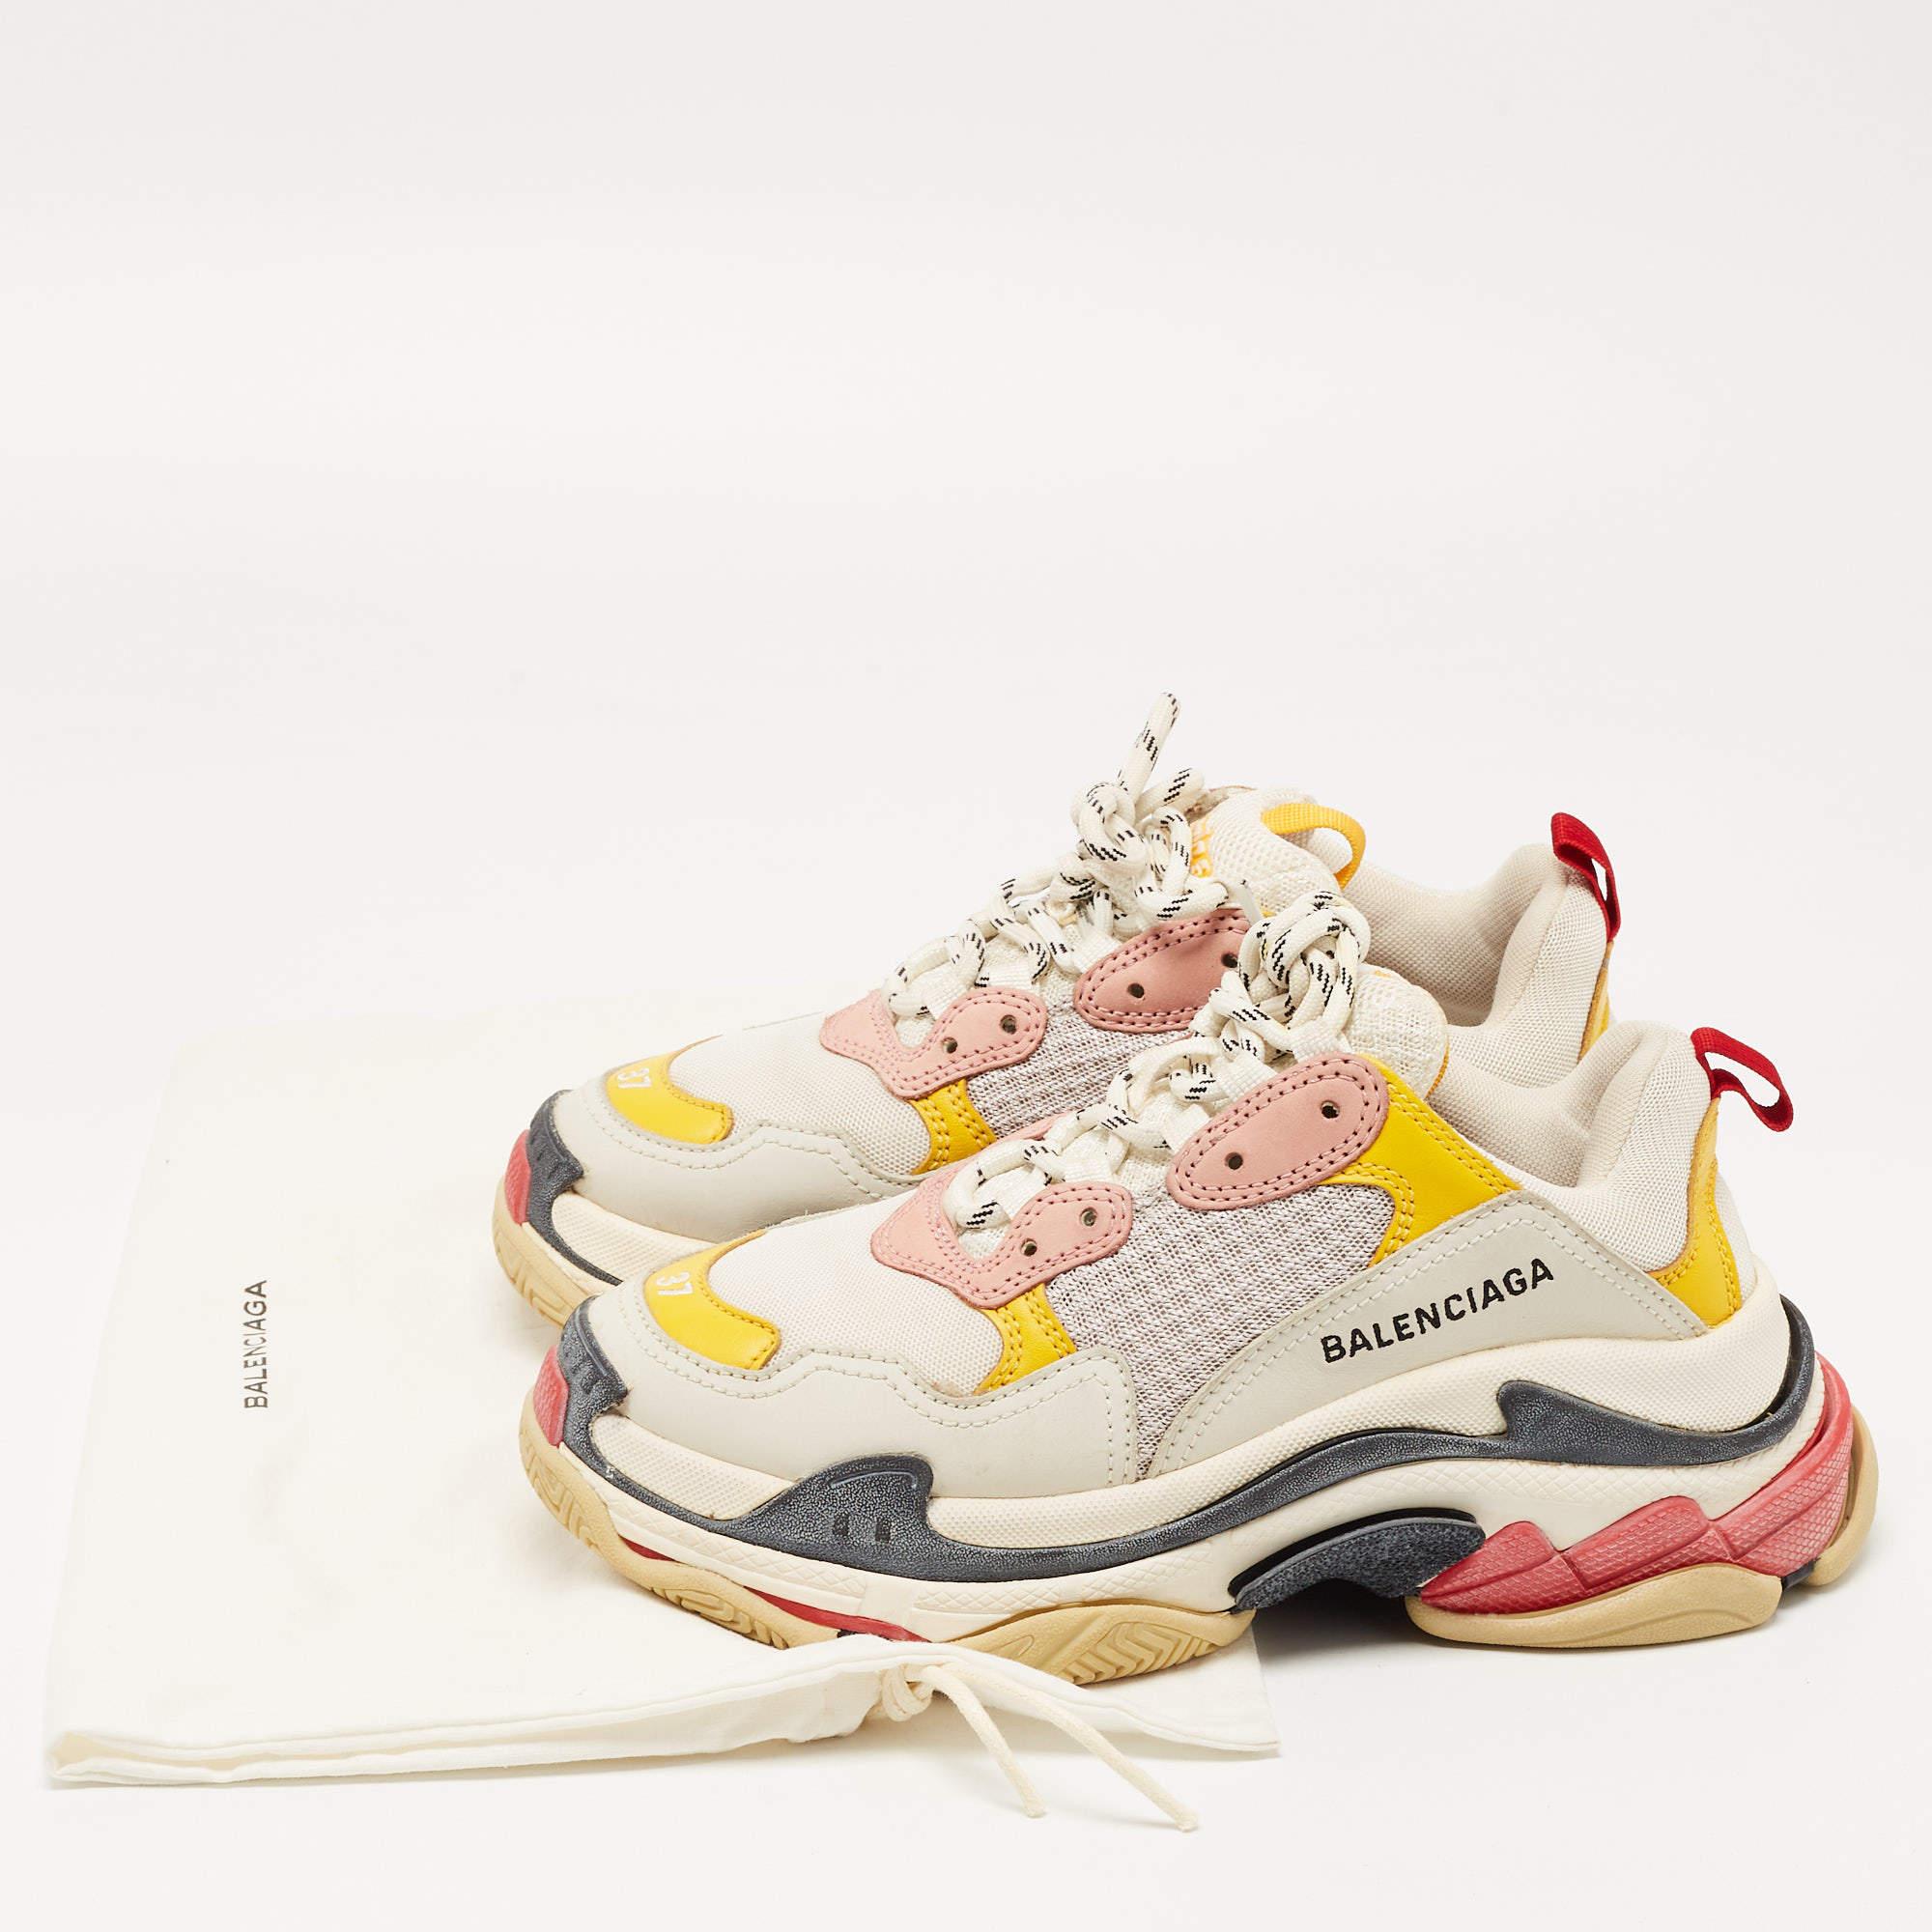 Balenciaga Multicolor Mesh and Leather Triple S Sneakers Size 37 2